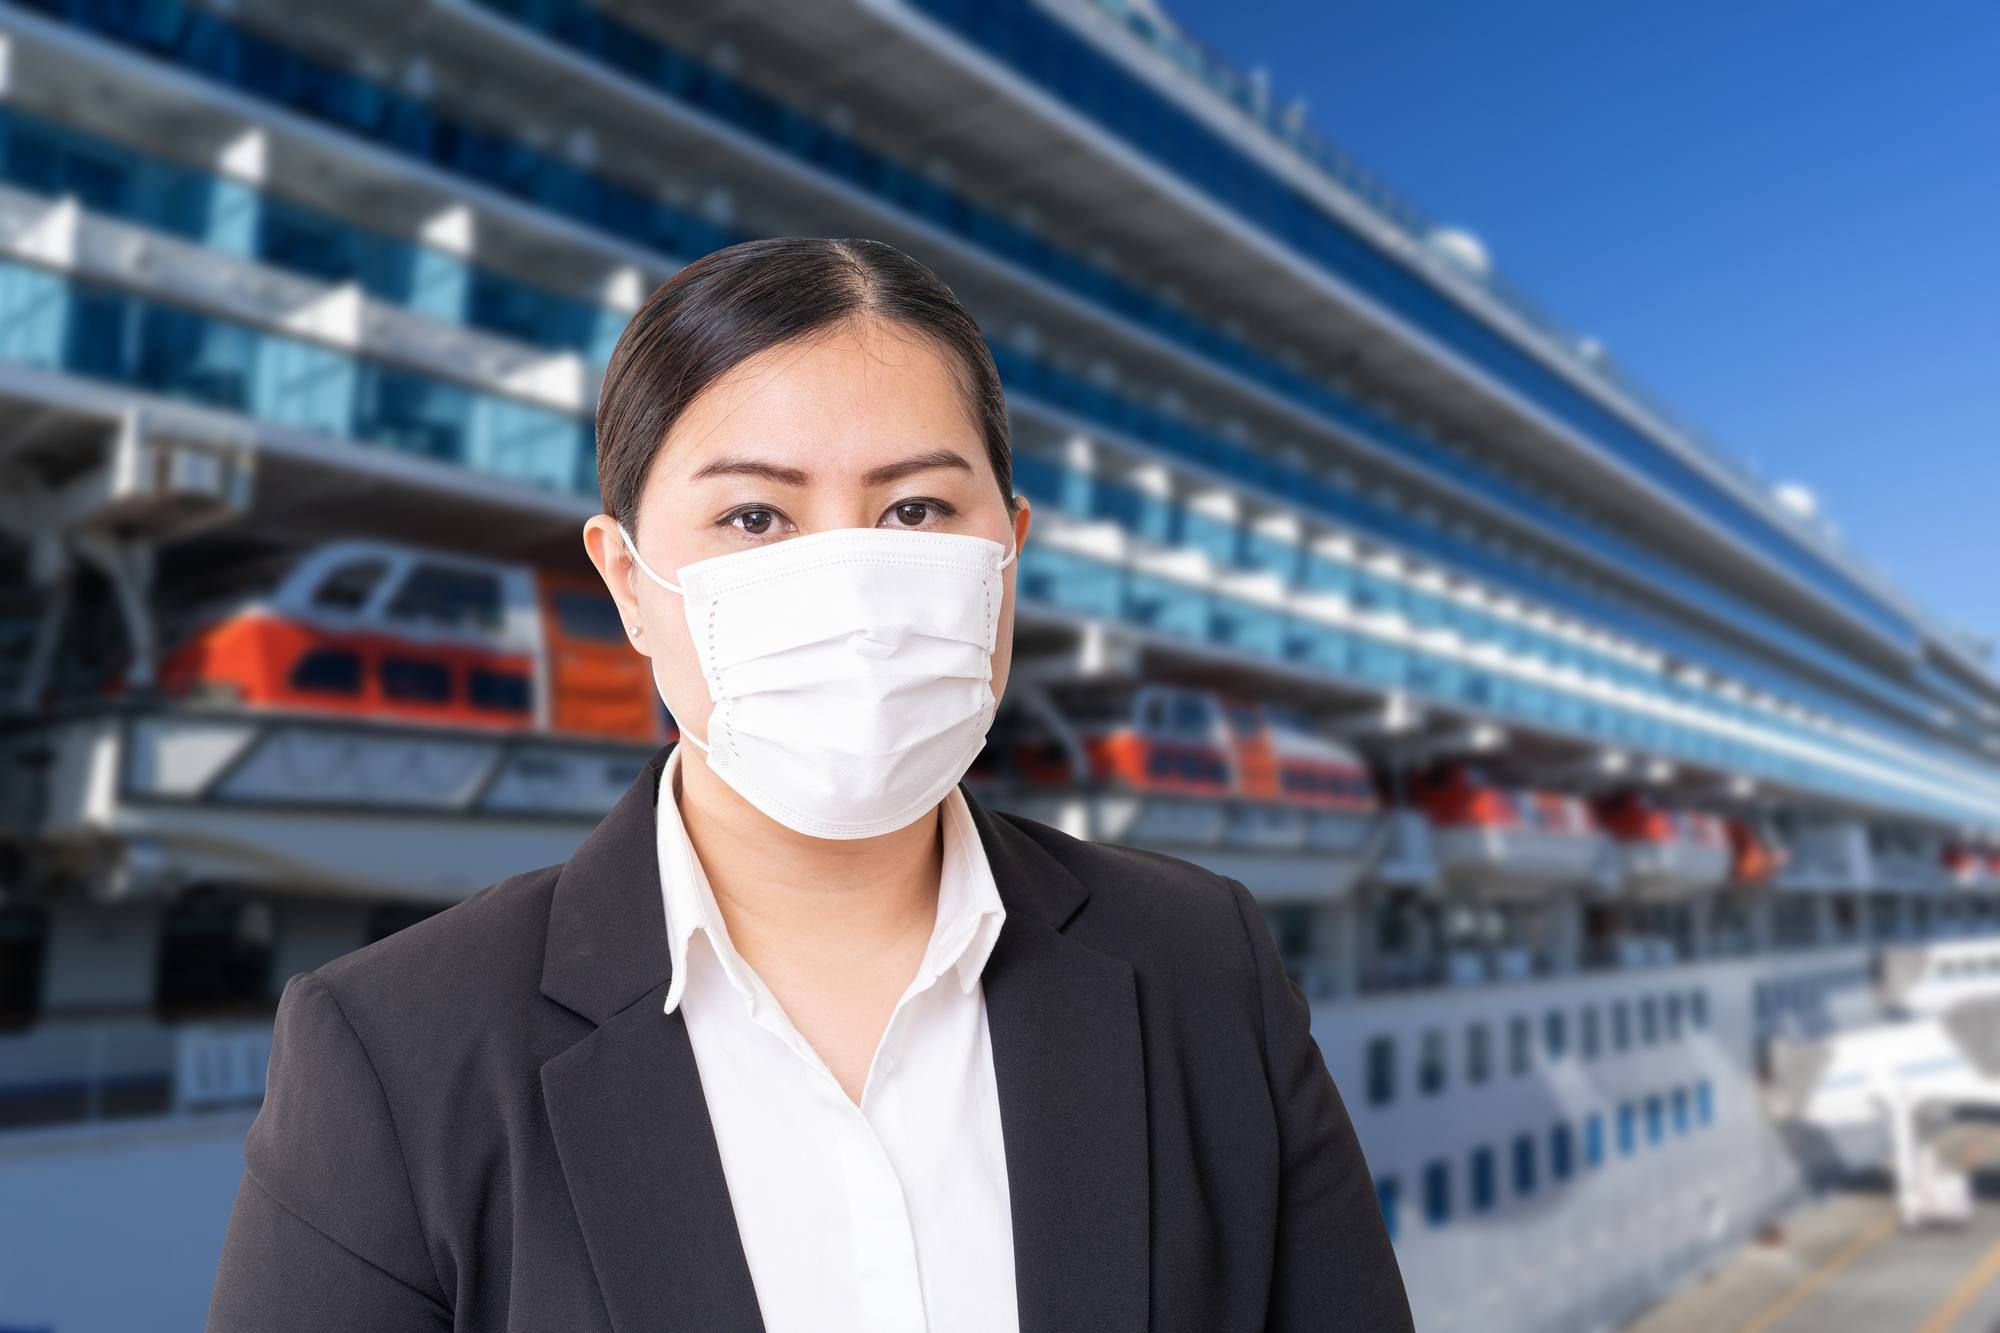 Cruise ship workers sued over allegedly unpaid work.